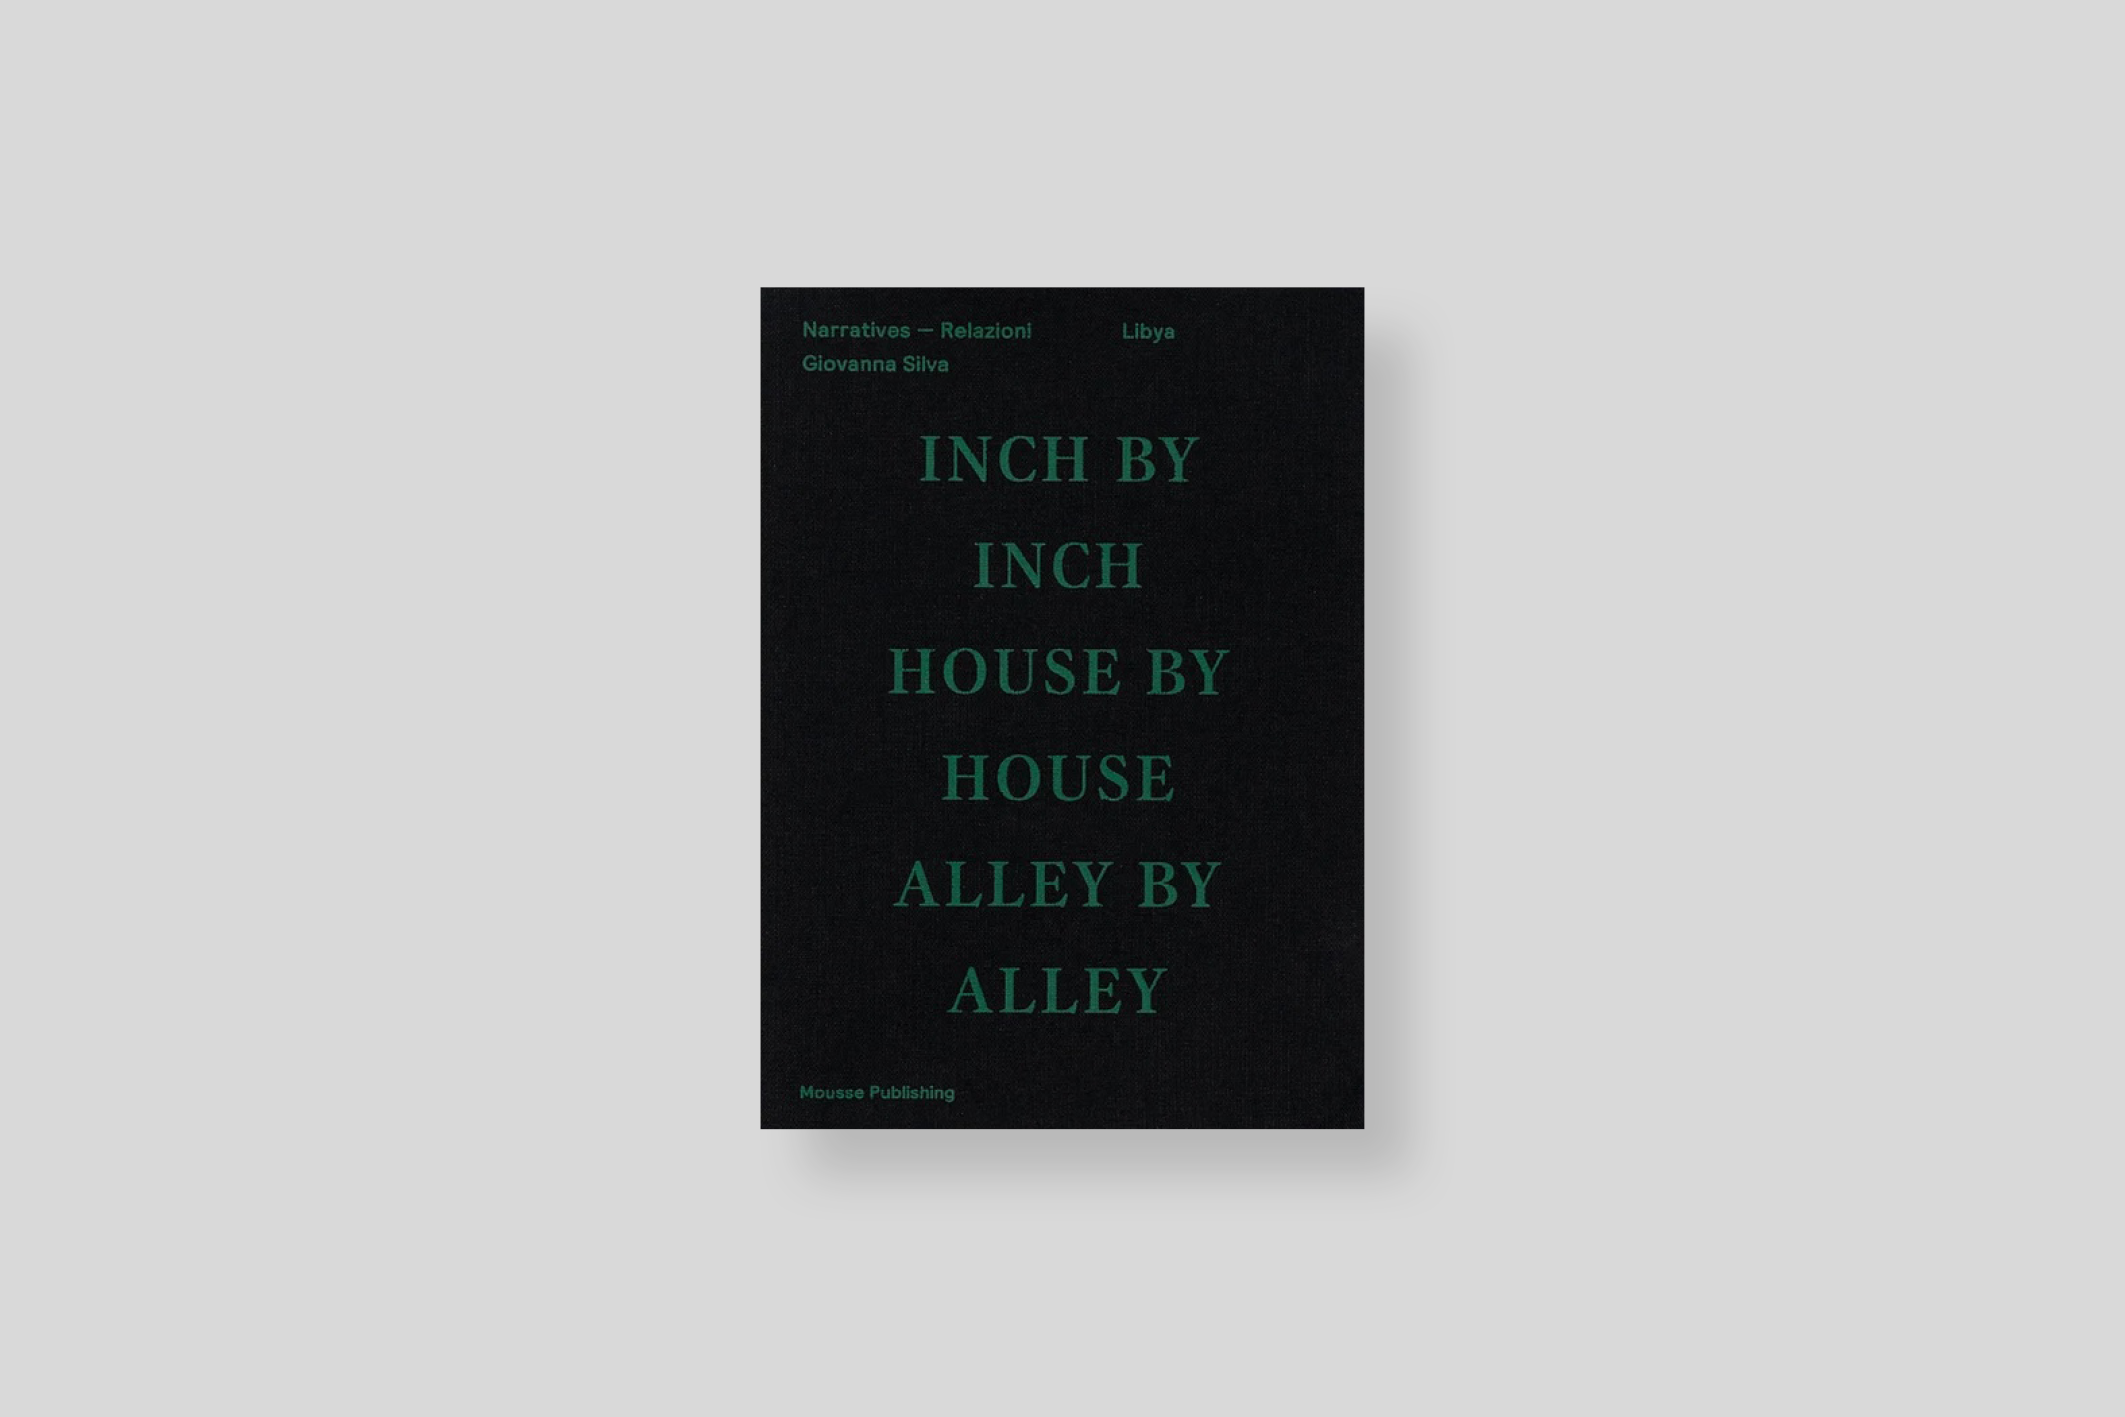 libya-inch-by-inch-house-by-house-alley-by-alley-silva-mousse-publishing-cover